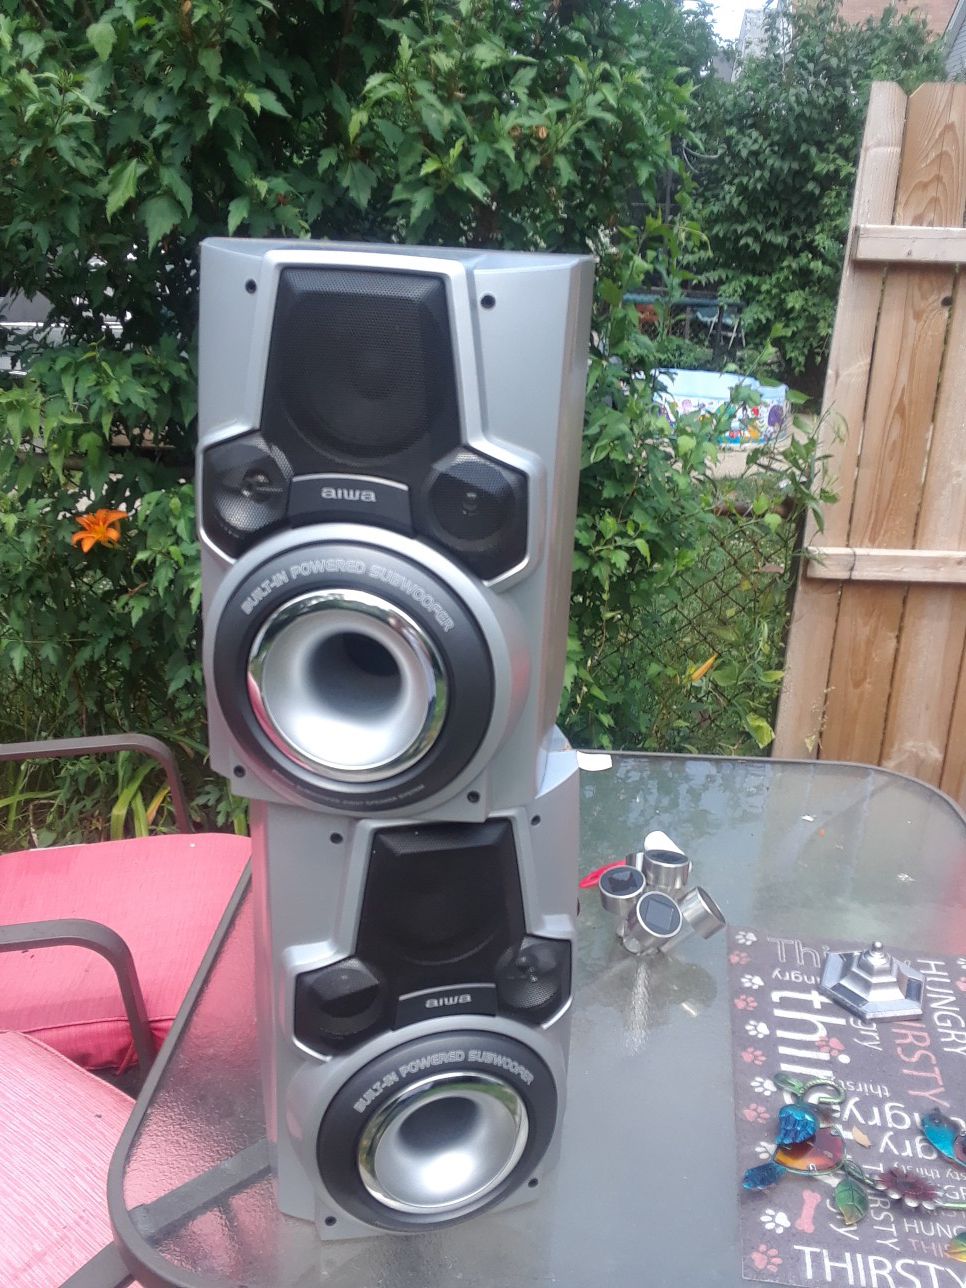 A nice set of speakers with woofer built in